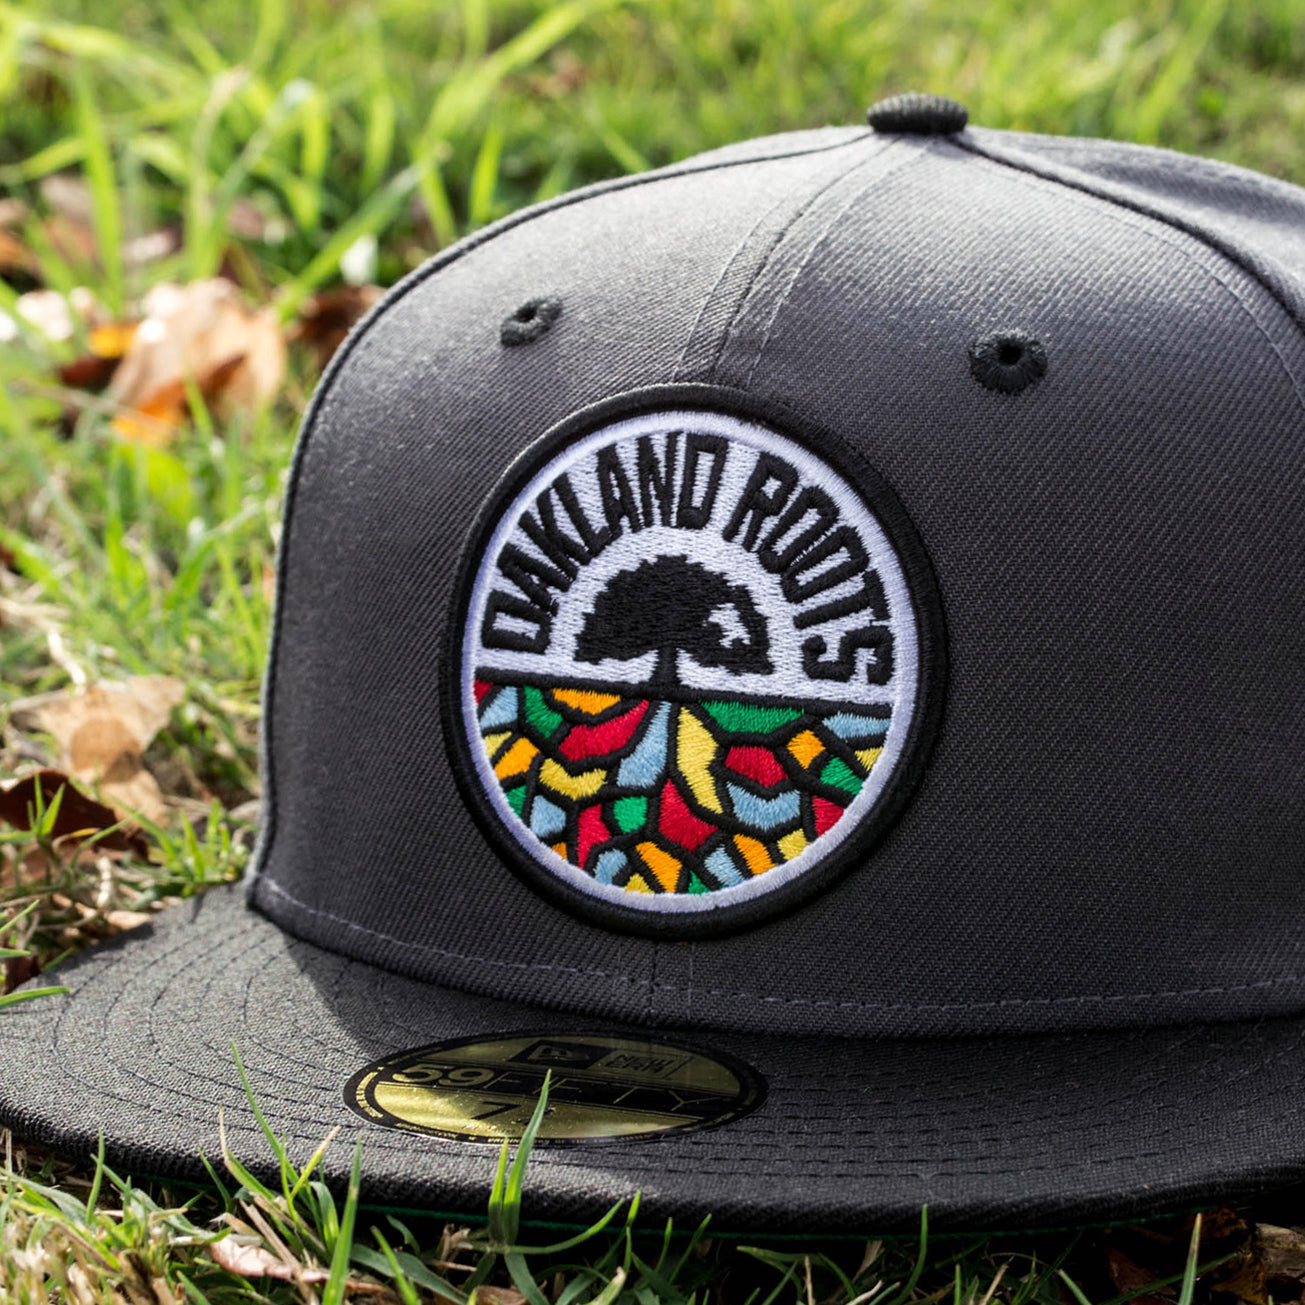 New Era Cap - Oakland Roots SC Logo, 59Fifty Fitted, Graphite